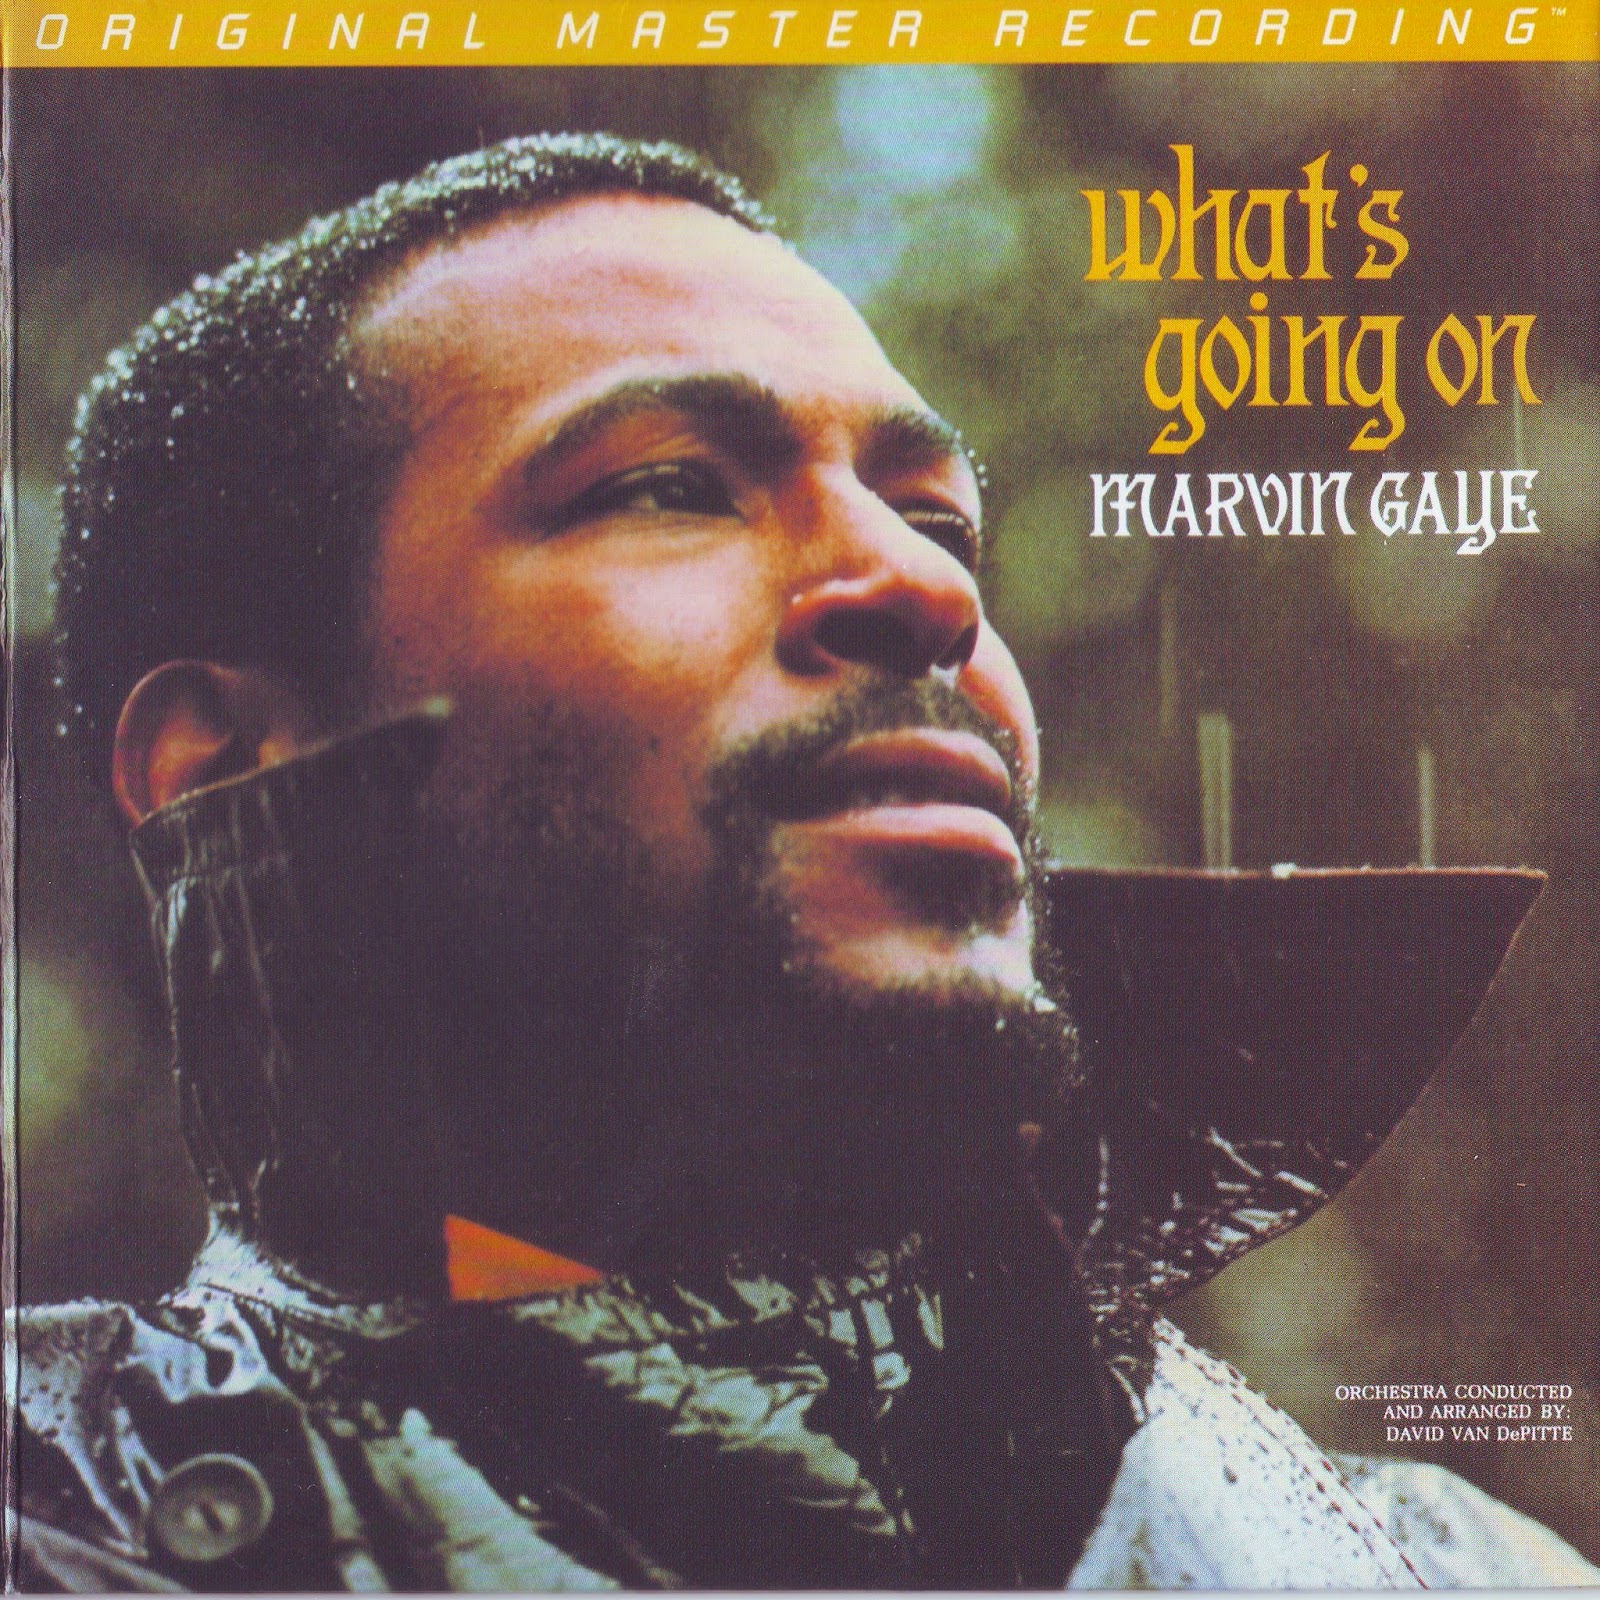 Music Crates Marvin Gaye Discography